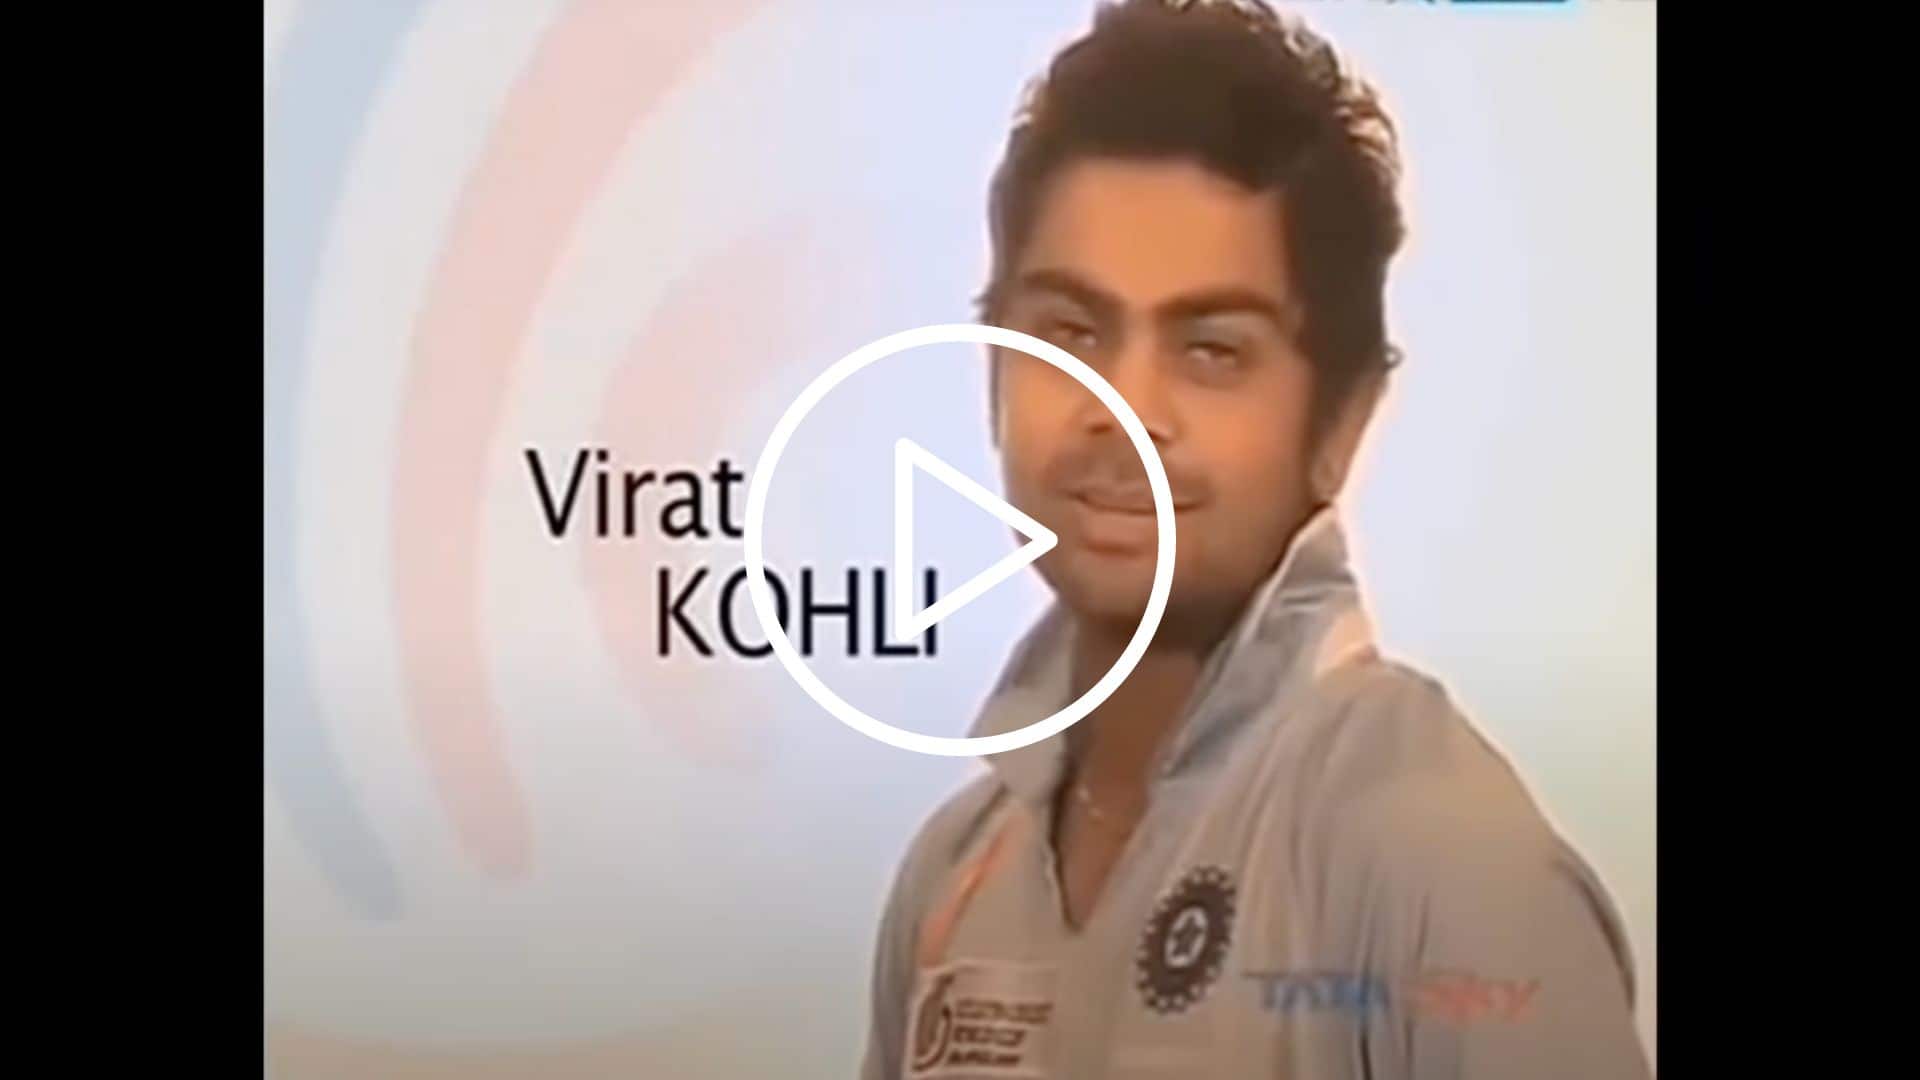 [Watch] When Virat Kohli Introduced Himself As A Right-Arm Quick Bowler